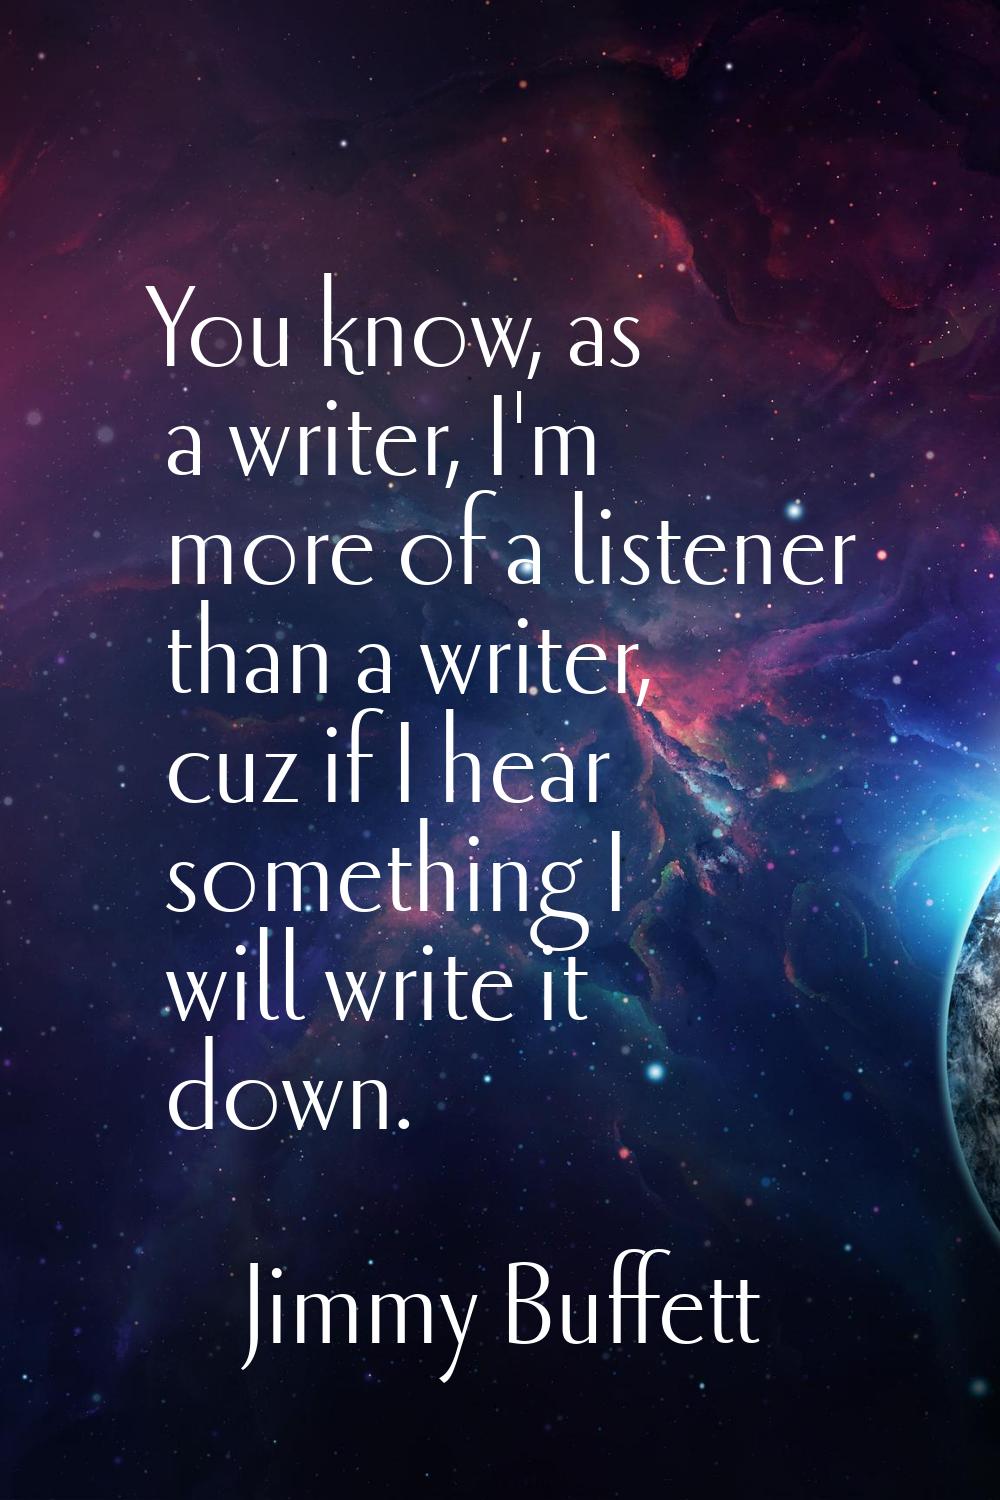 You know, as a writer, I'm more of a listener than a writer, cuz if I hear something I will write i